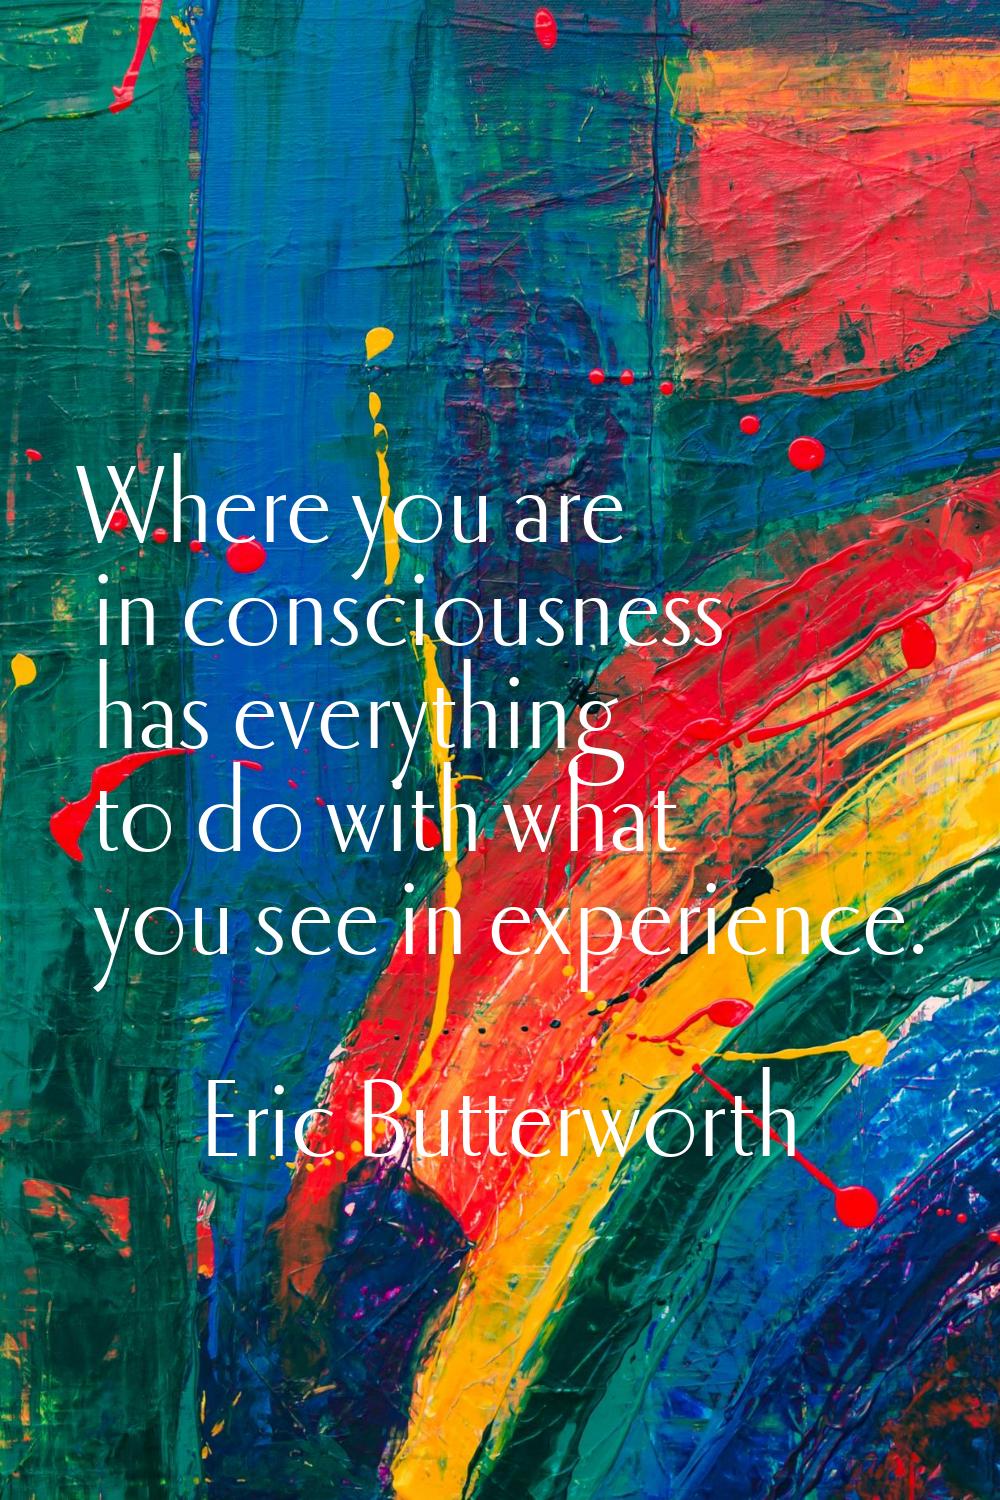 Where you are in consciousness has everything to do with what you see in experience.